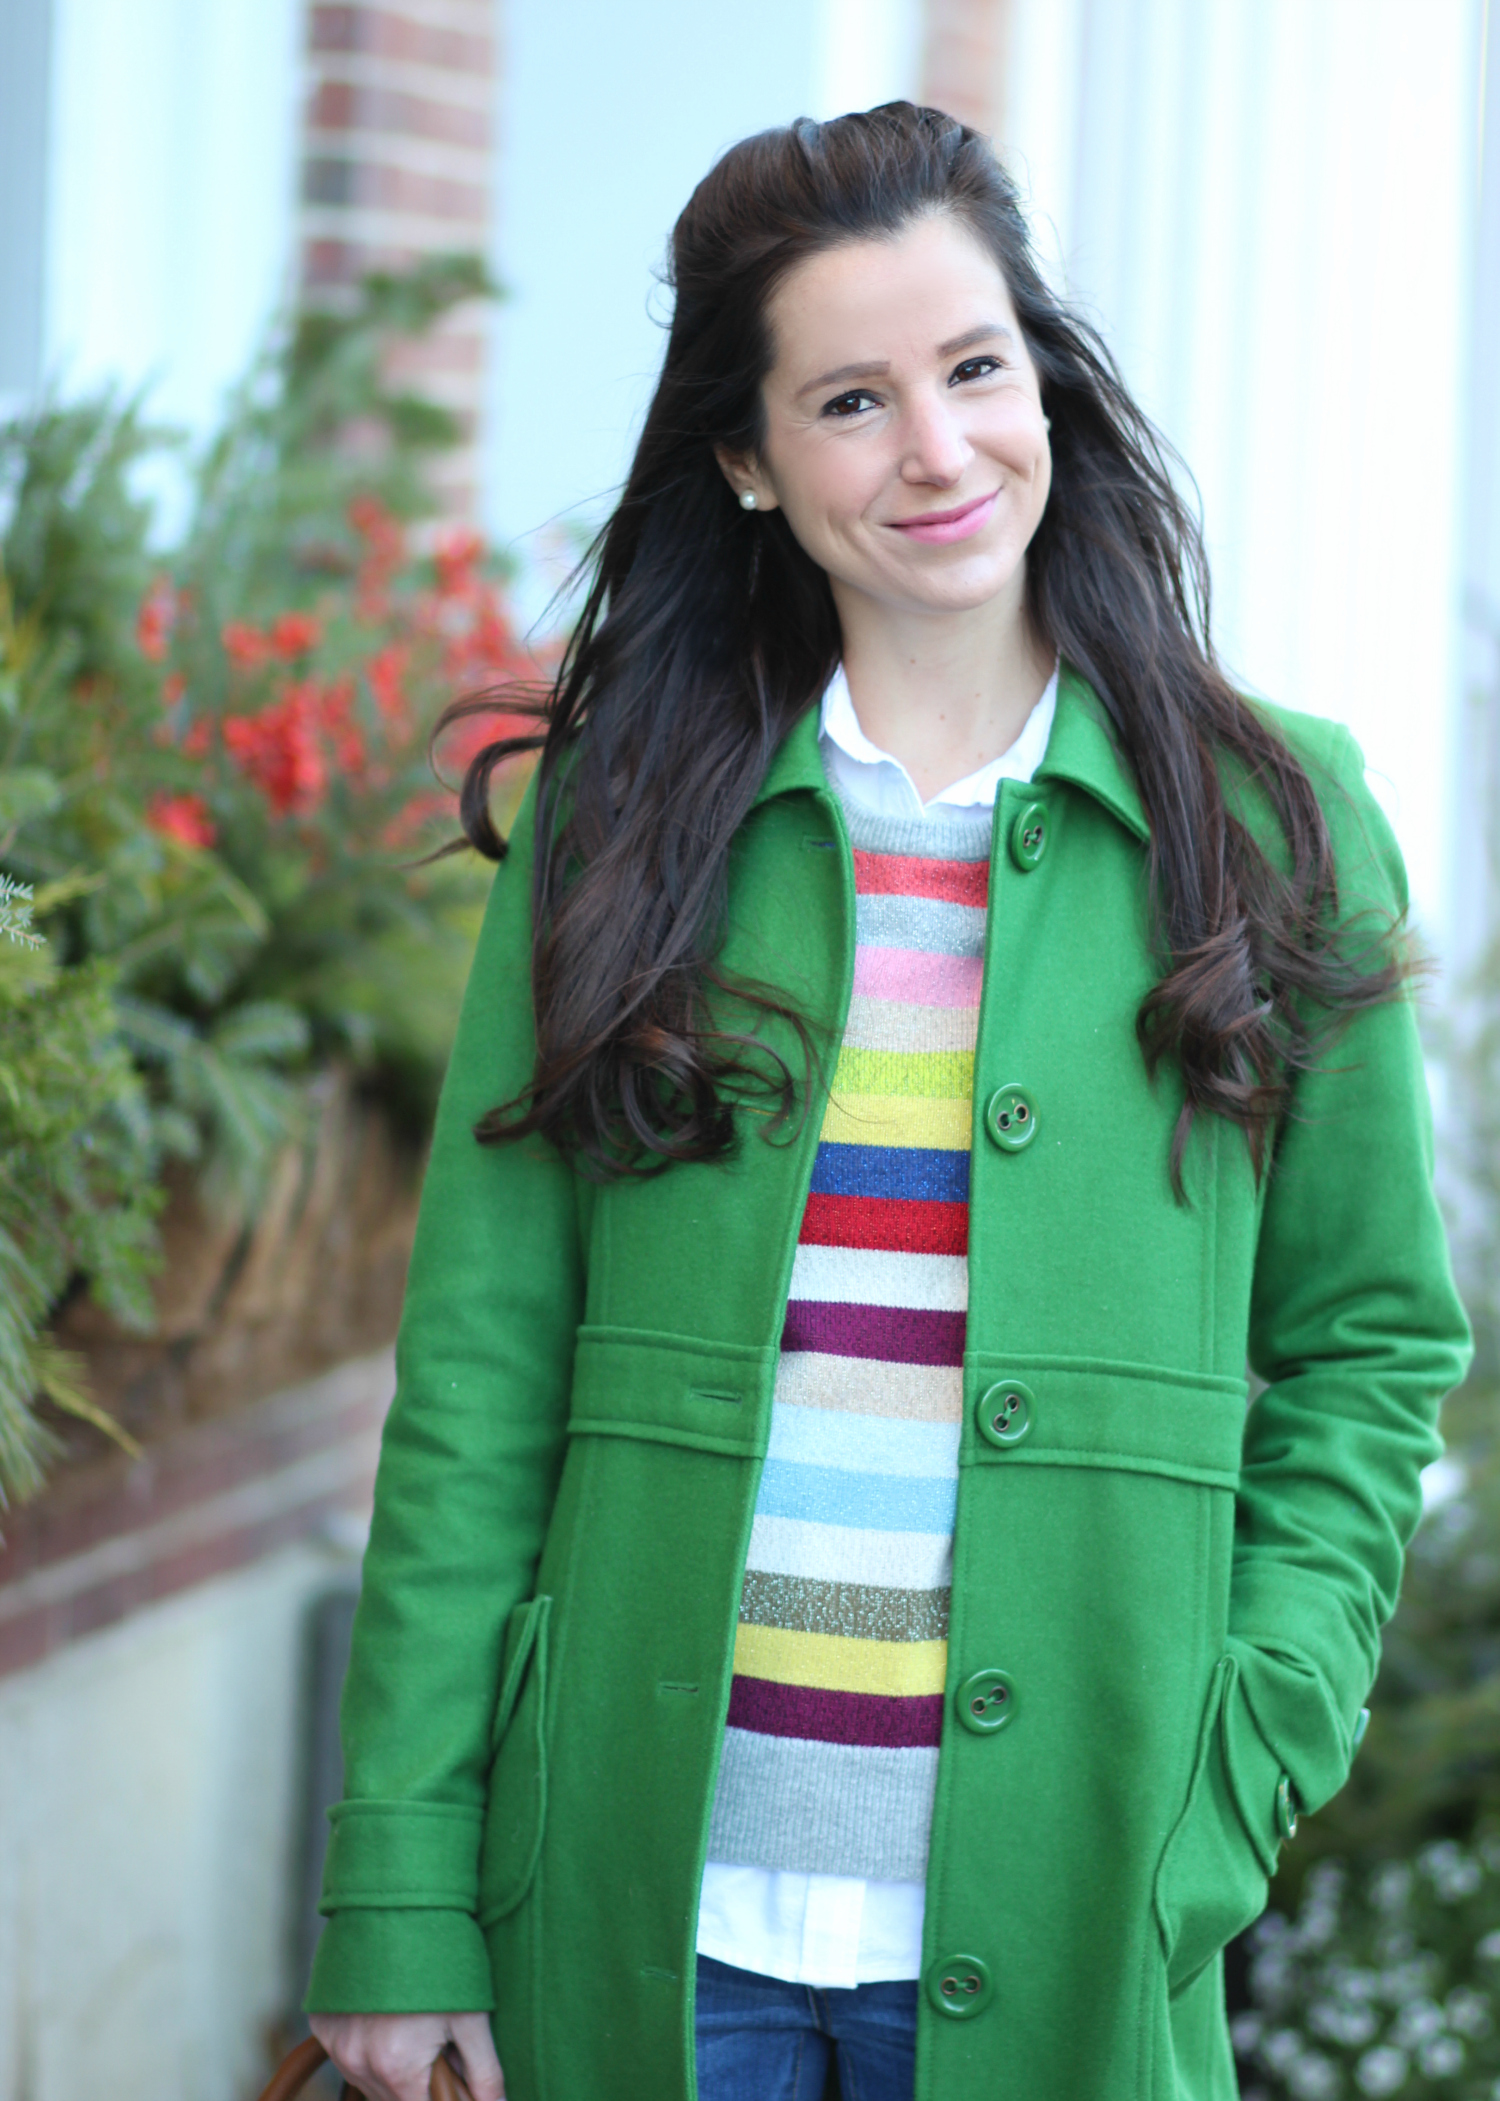 Crazy stripe GAP sweater plus 5 winter hair hacks every girl should know